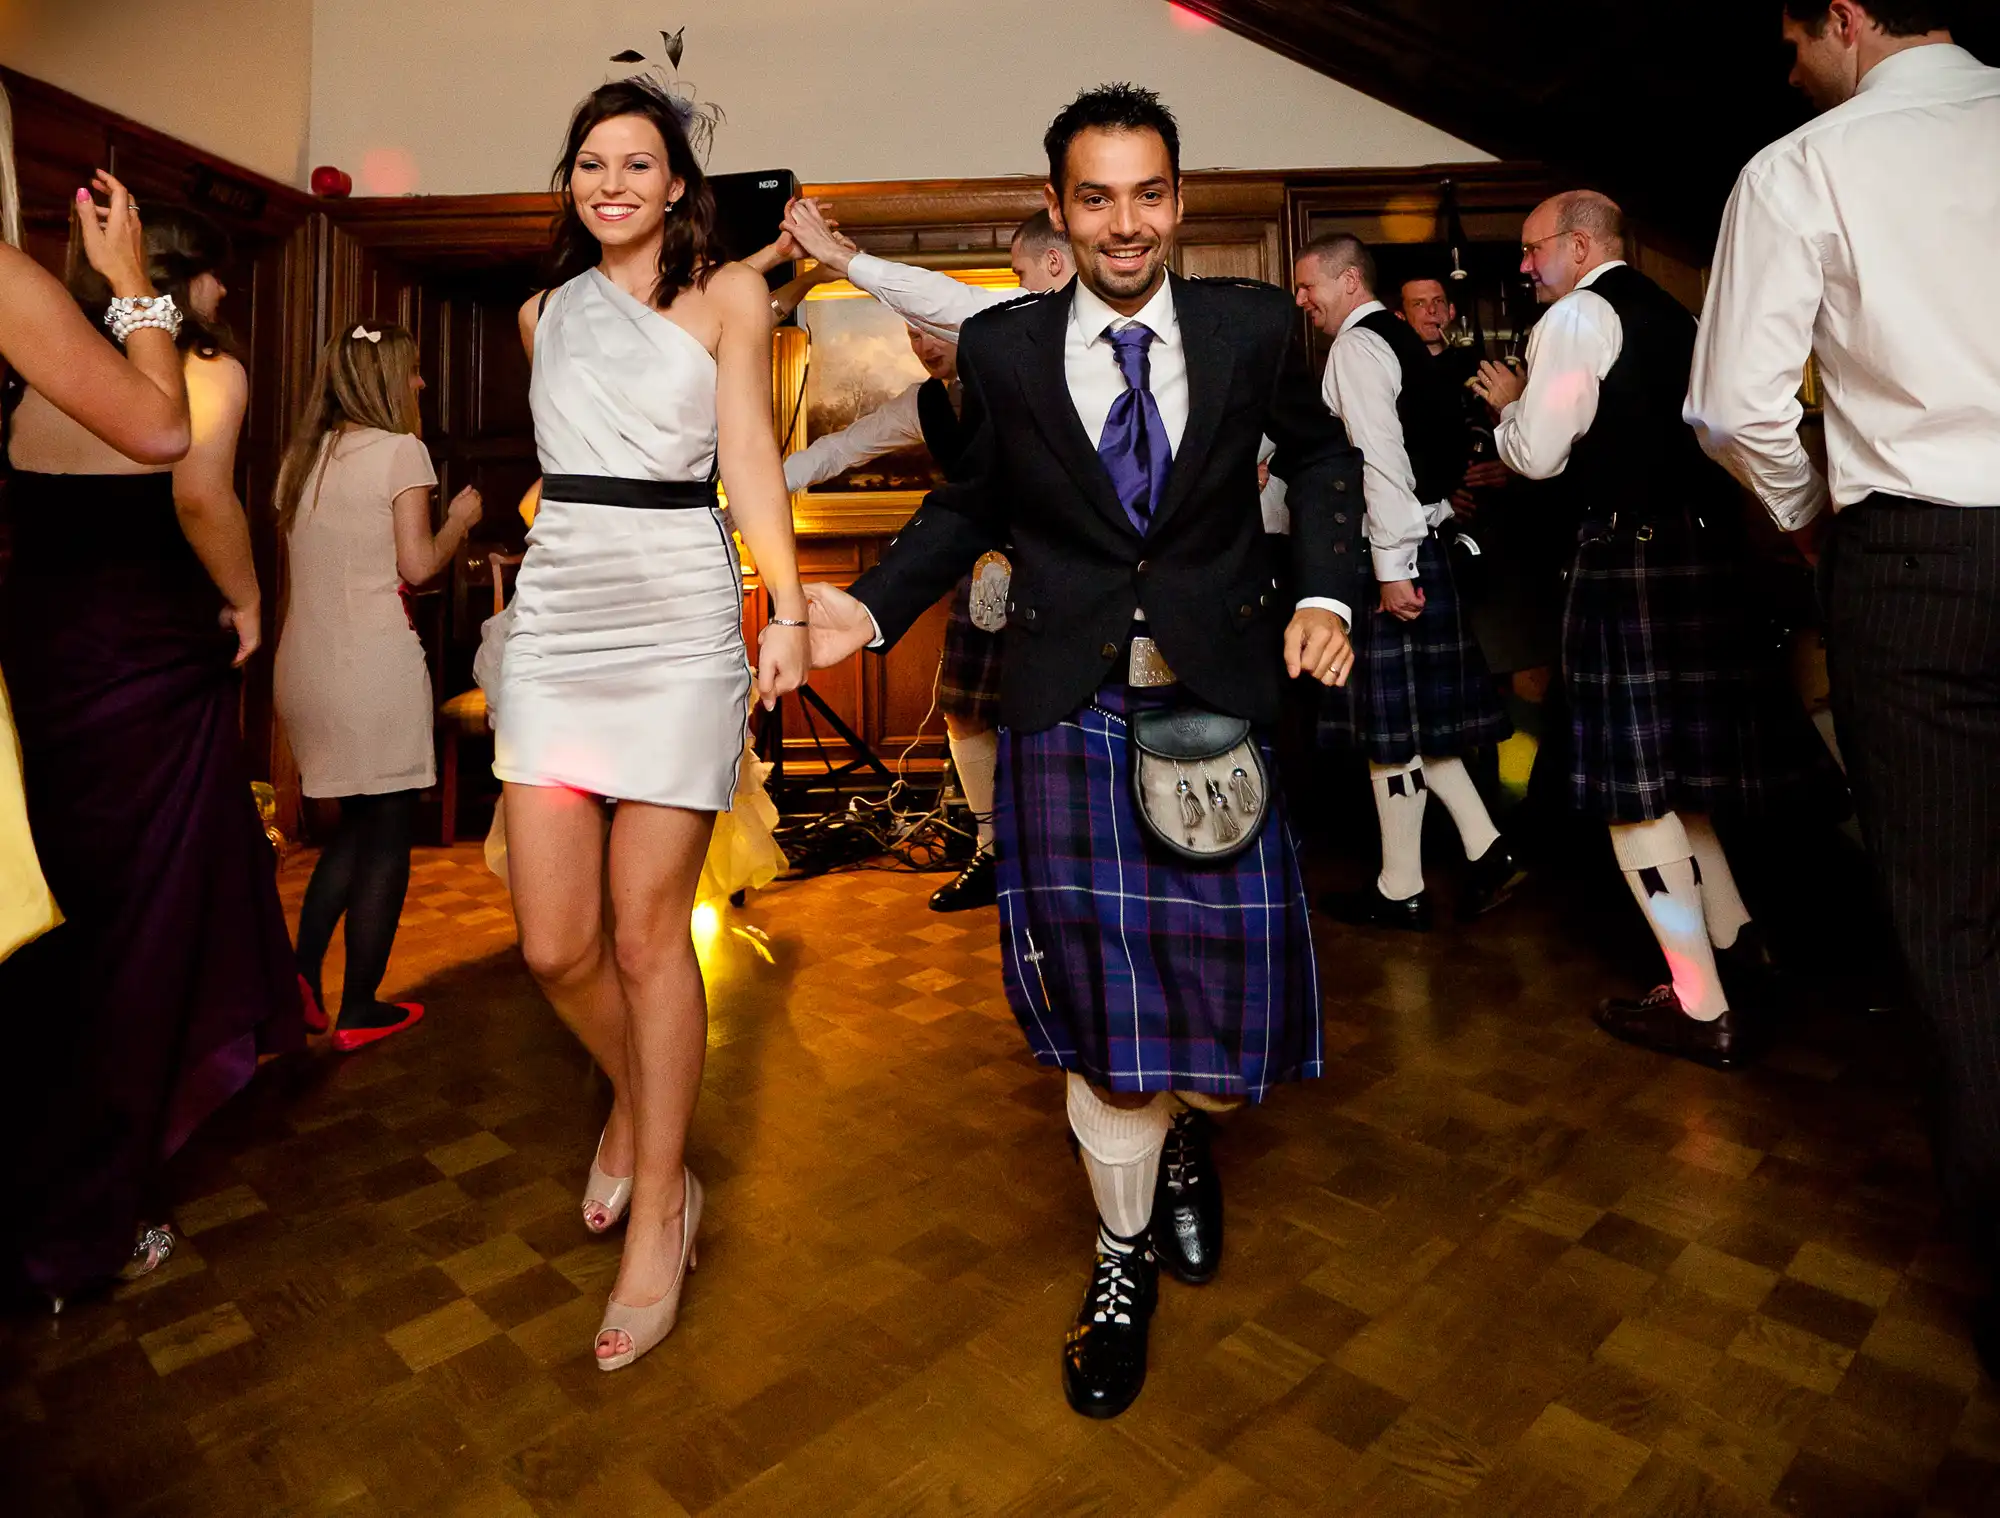 A couple dancing joyfully at a wedding reception, the man in a traditional kilt and the woman in a white dress, surrounded by other guests in kilts.